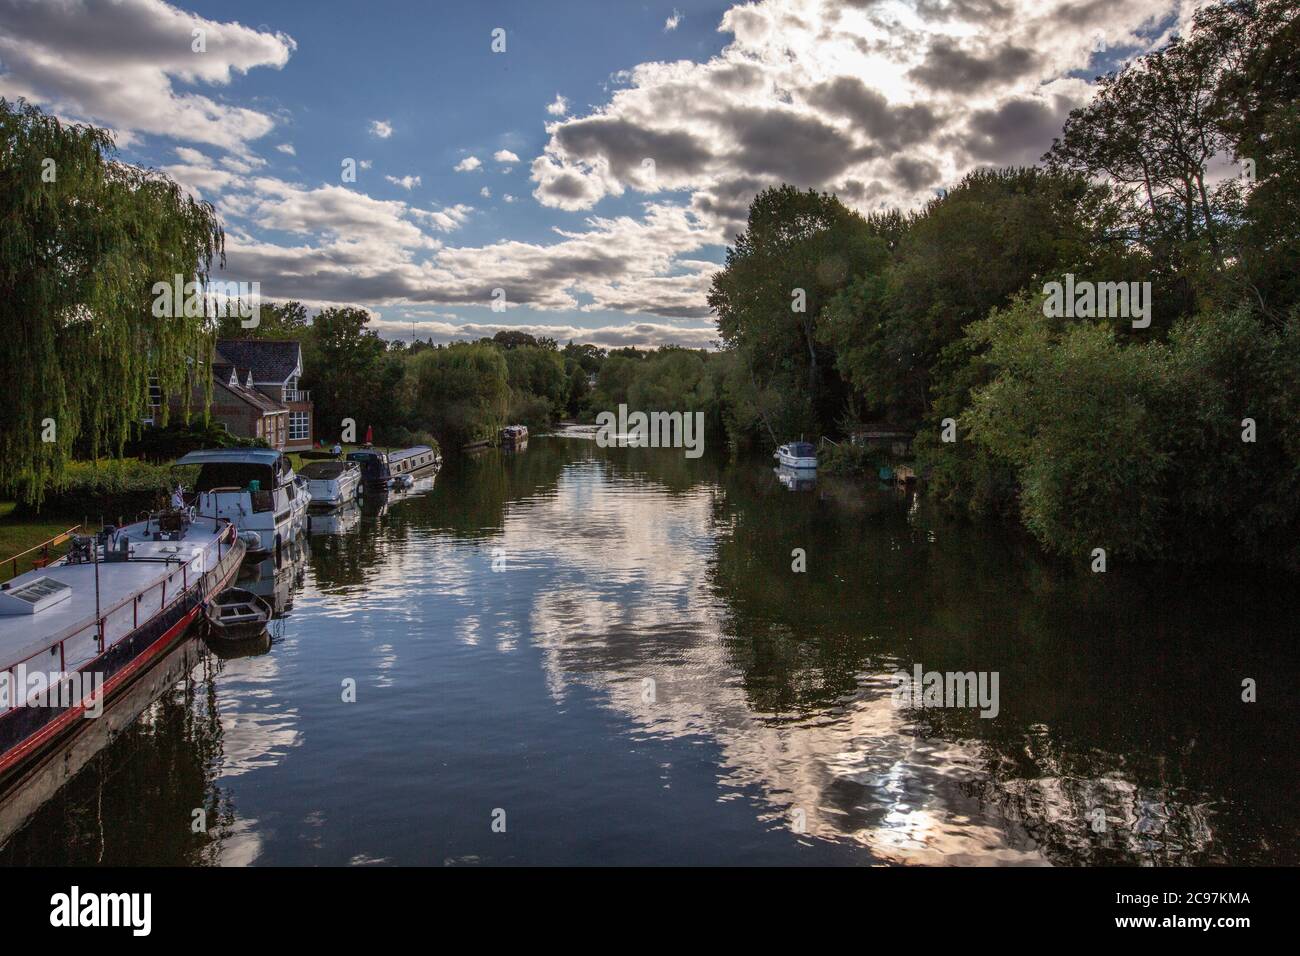 Pangbourne village, situated on the River Thames, in the county of Berkshire, England, United Kingdom Stock Photo